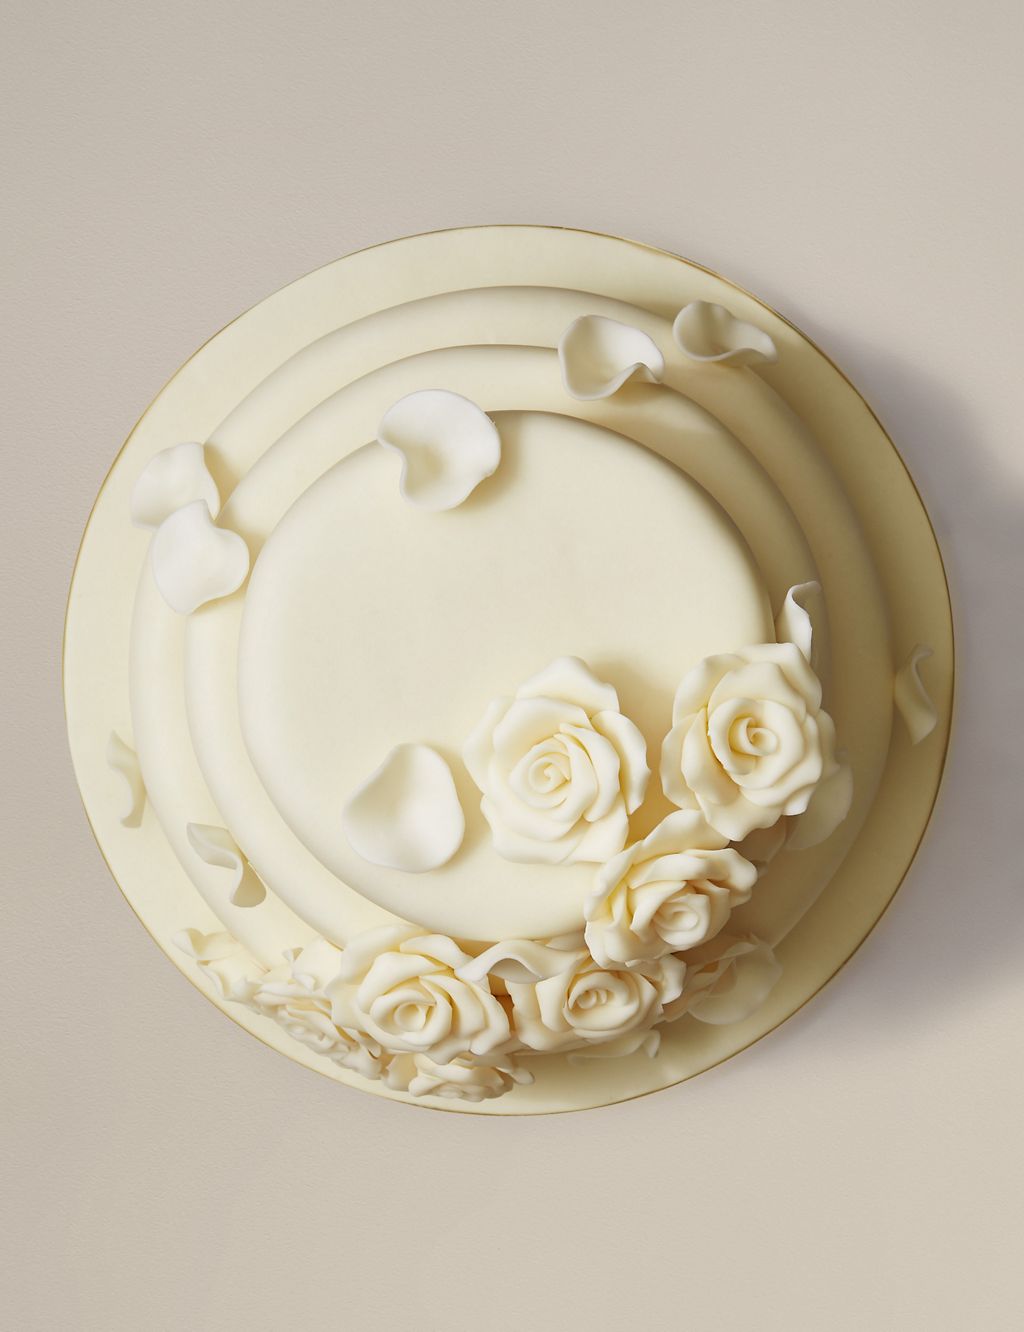 Chocolate Rose Wedding Cake with White Chocolate Icing - Assorted Flavours (Serves 150) Last order date 26th March 1 of 4